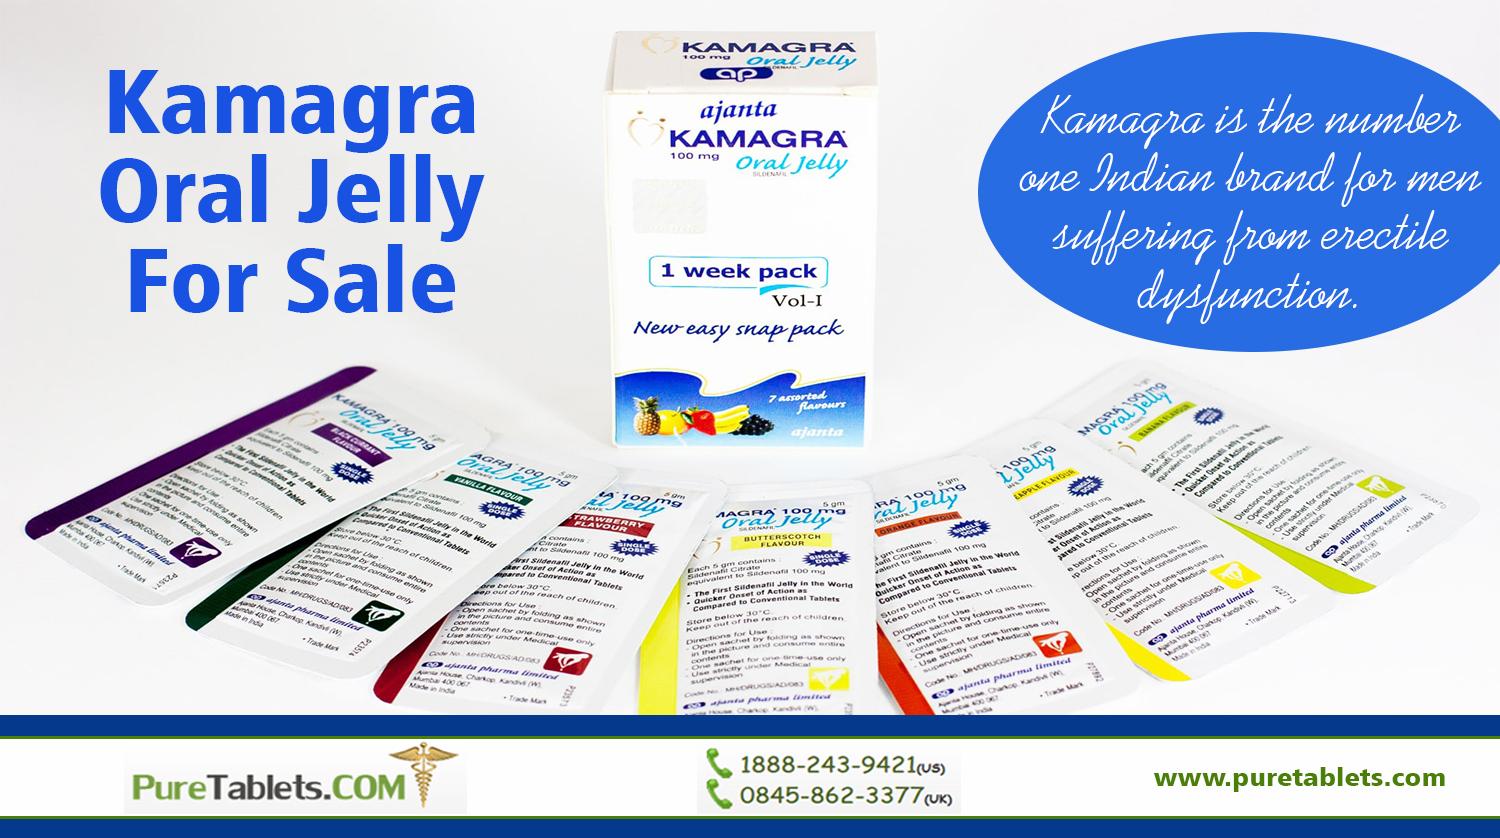 Kamagra Oral Jelly For Sale (2)